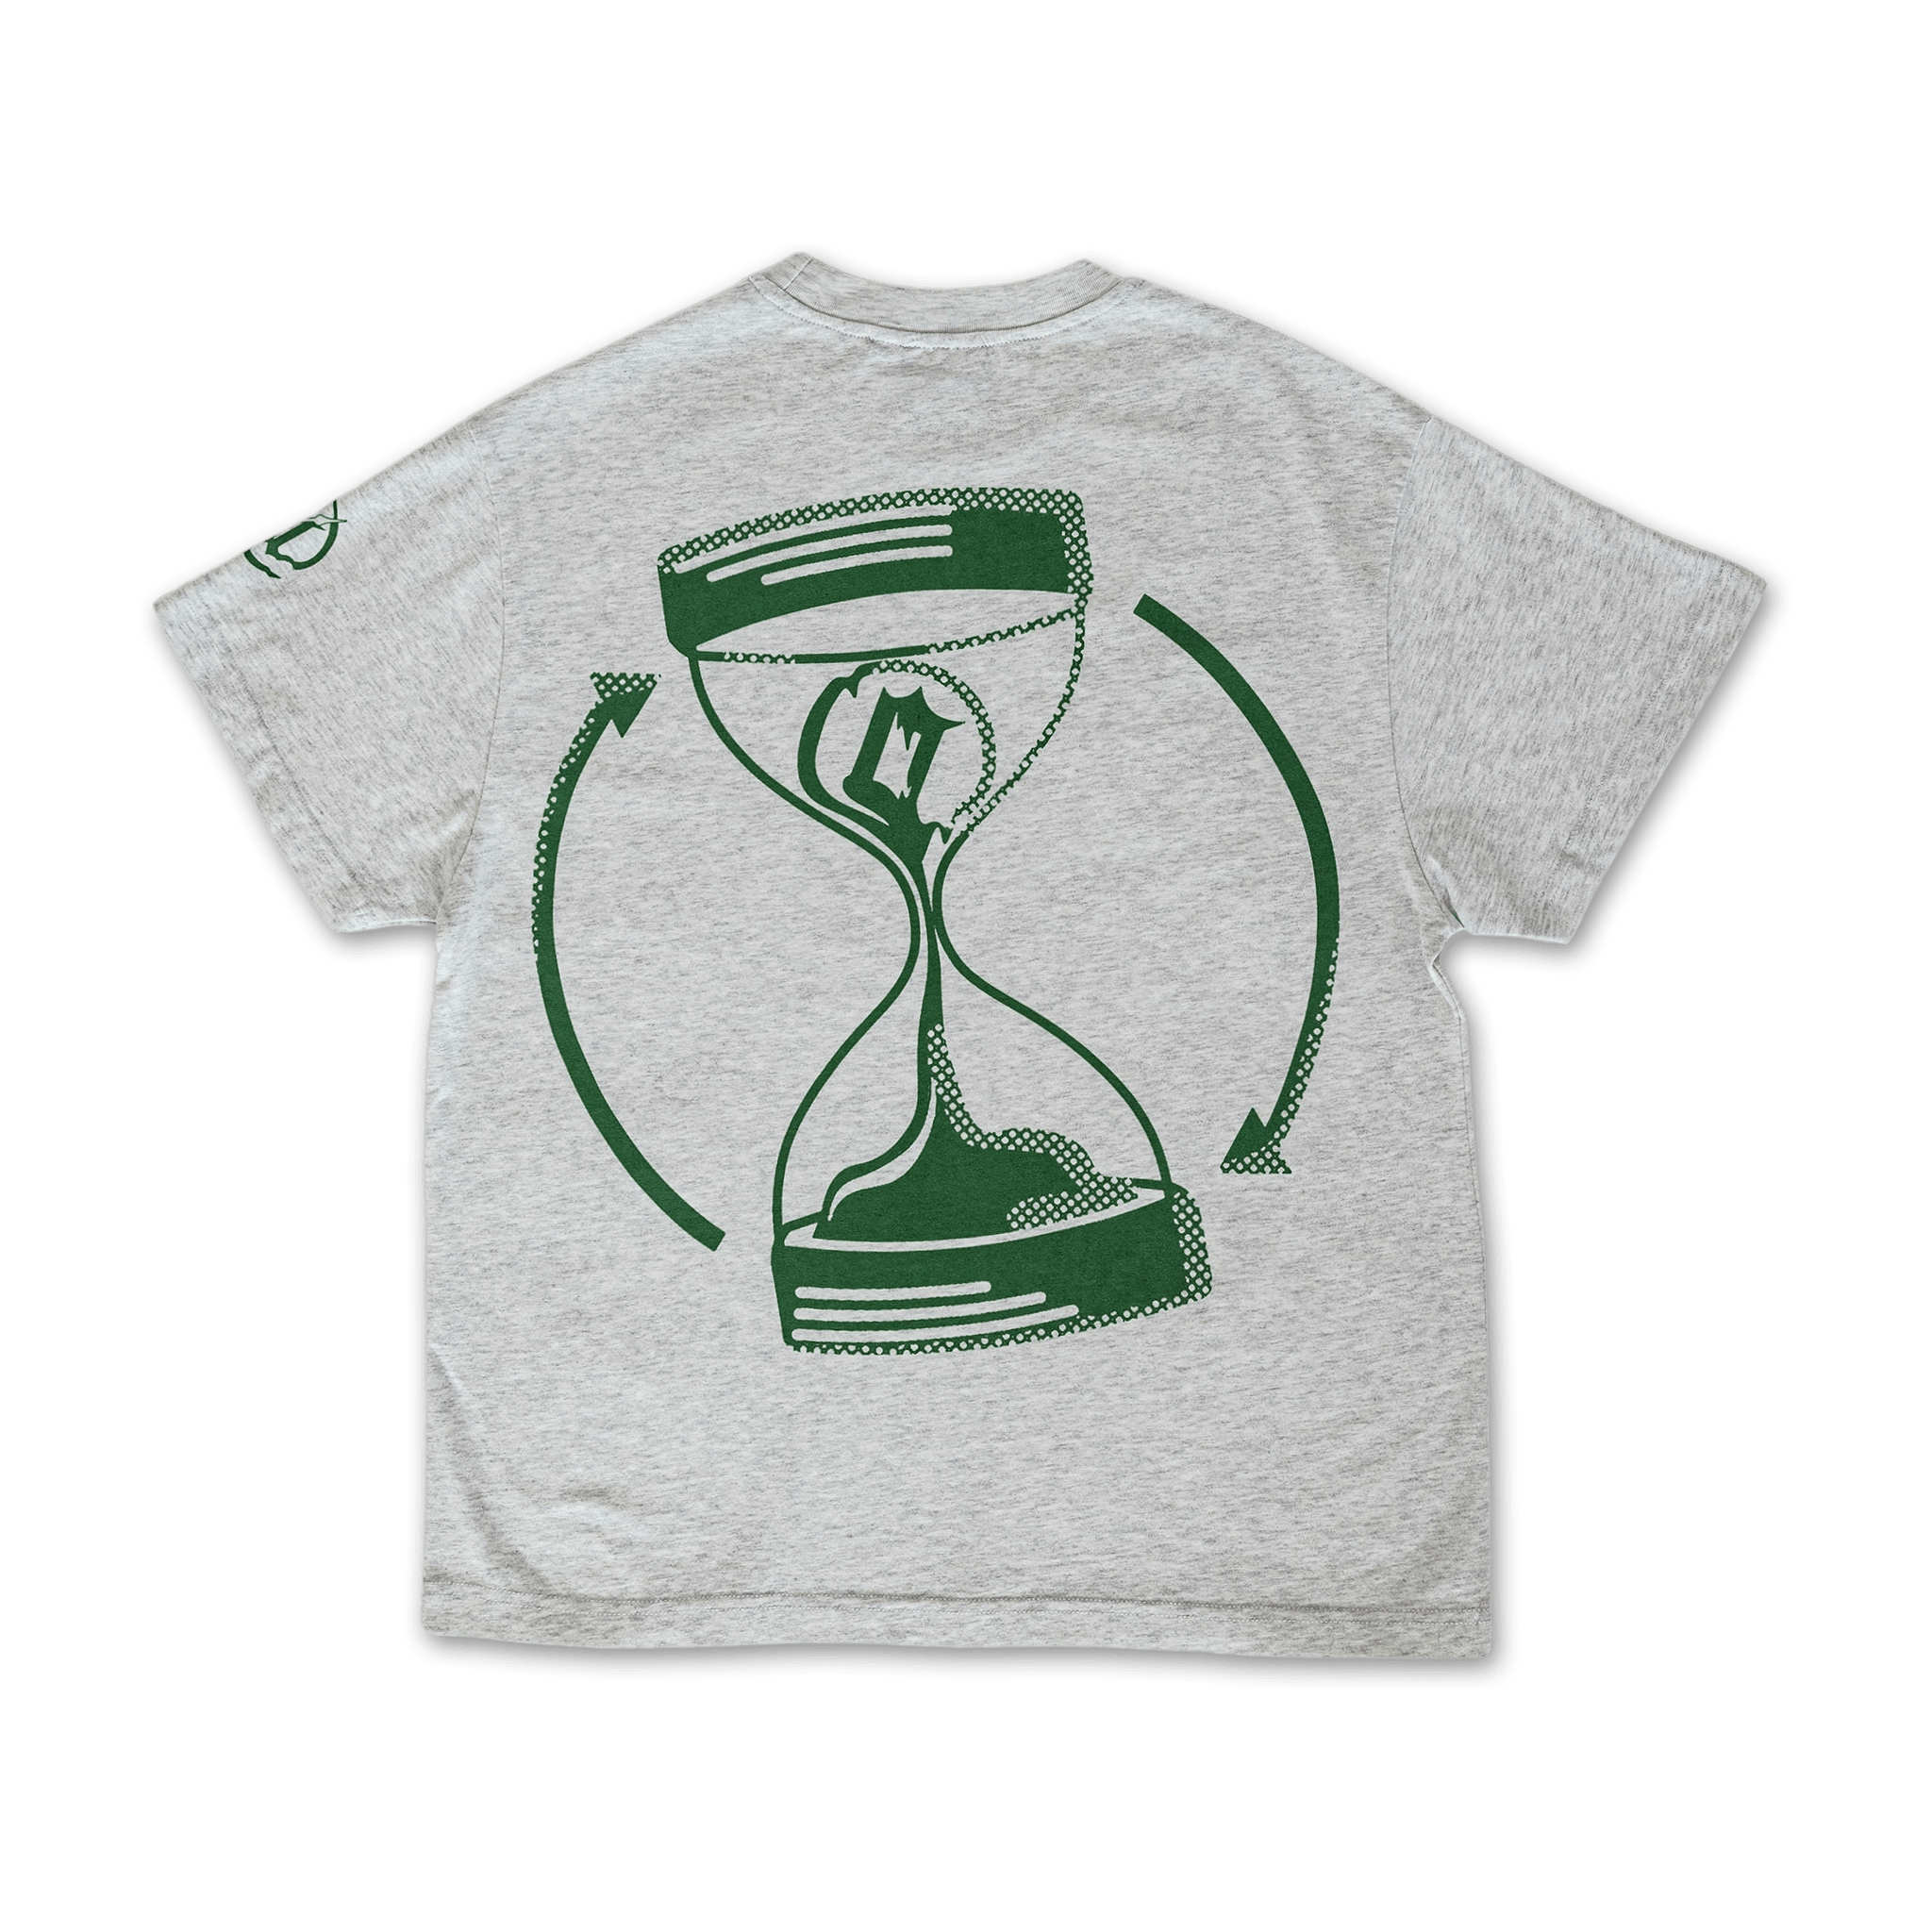 All The Time Tee - All@Once